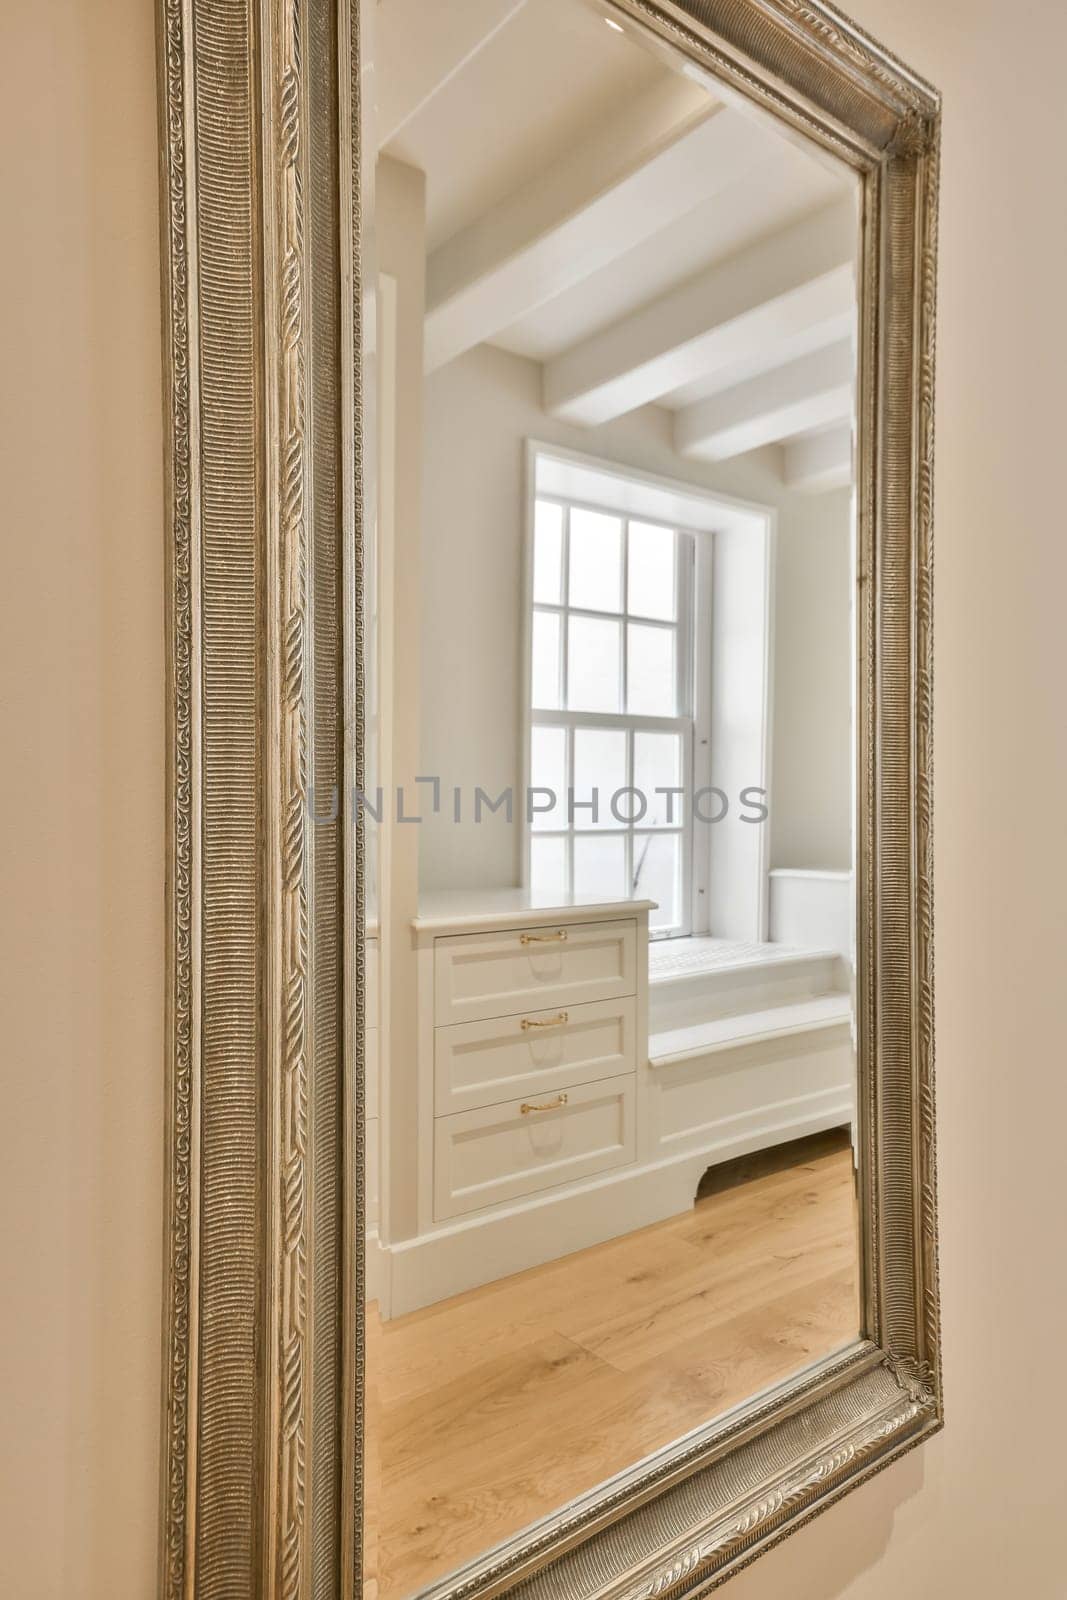 a large mirror in the corner of a room with white walls and hardwood flooring on the other side of the frame